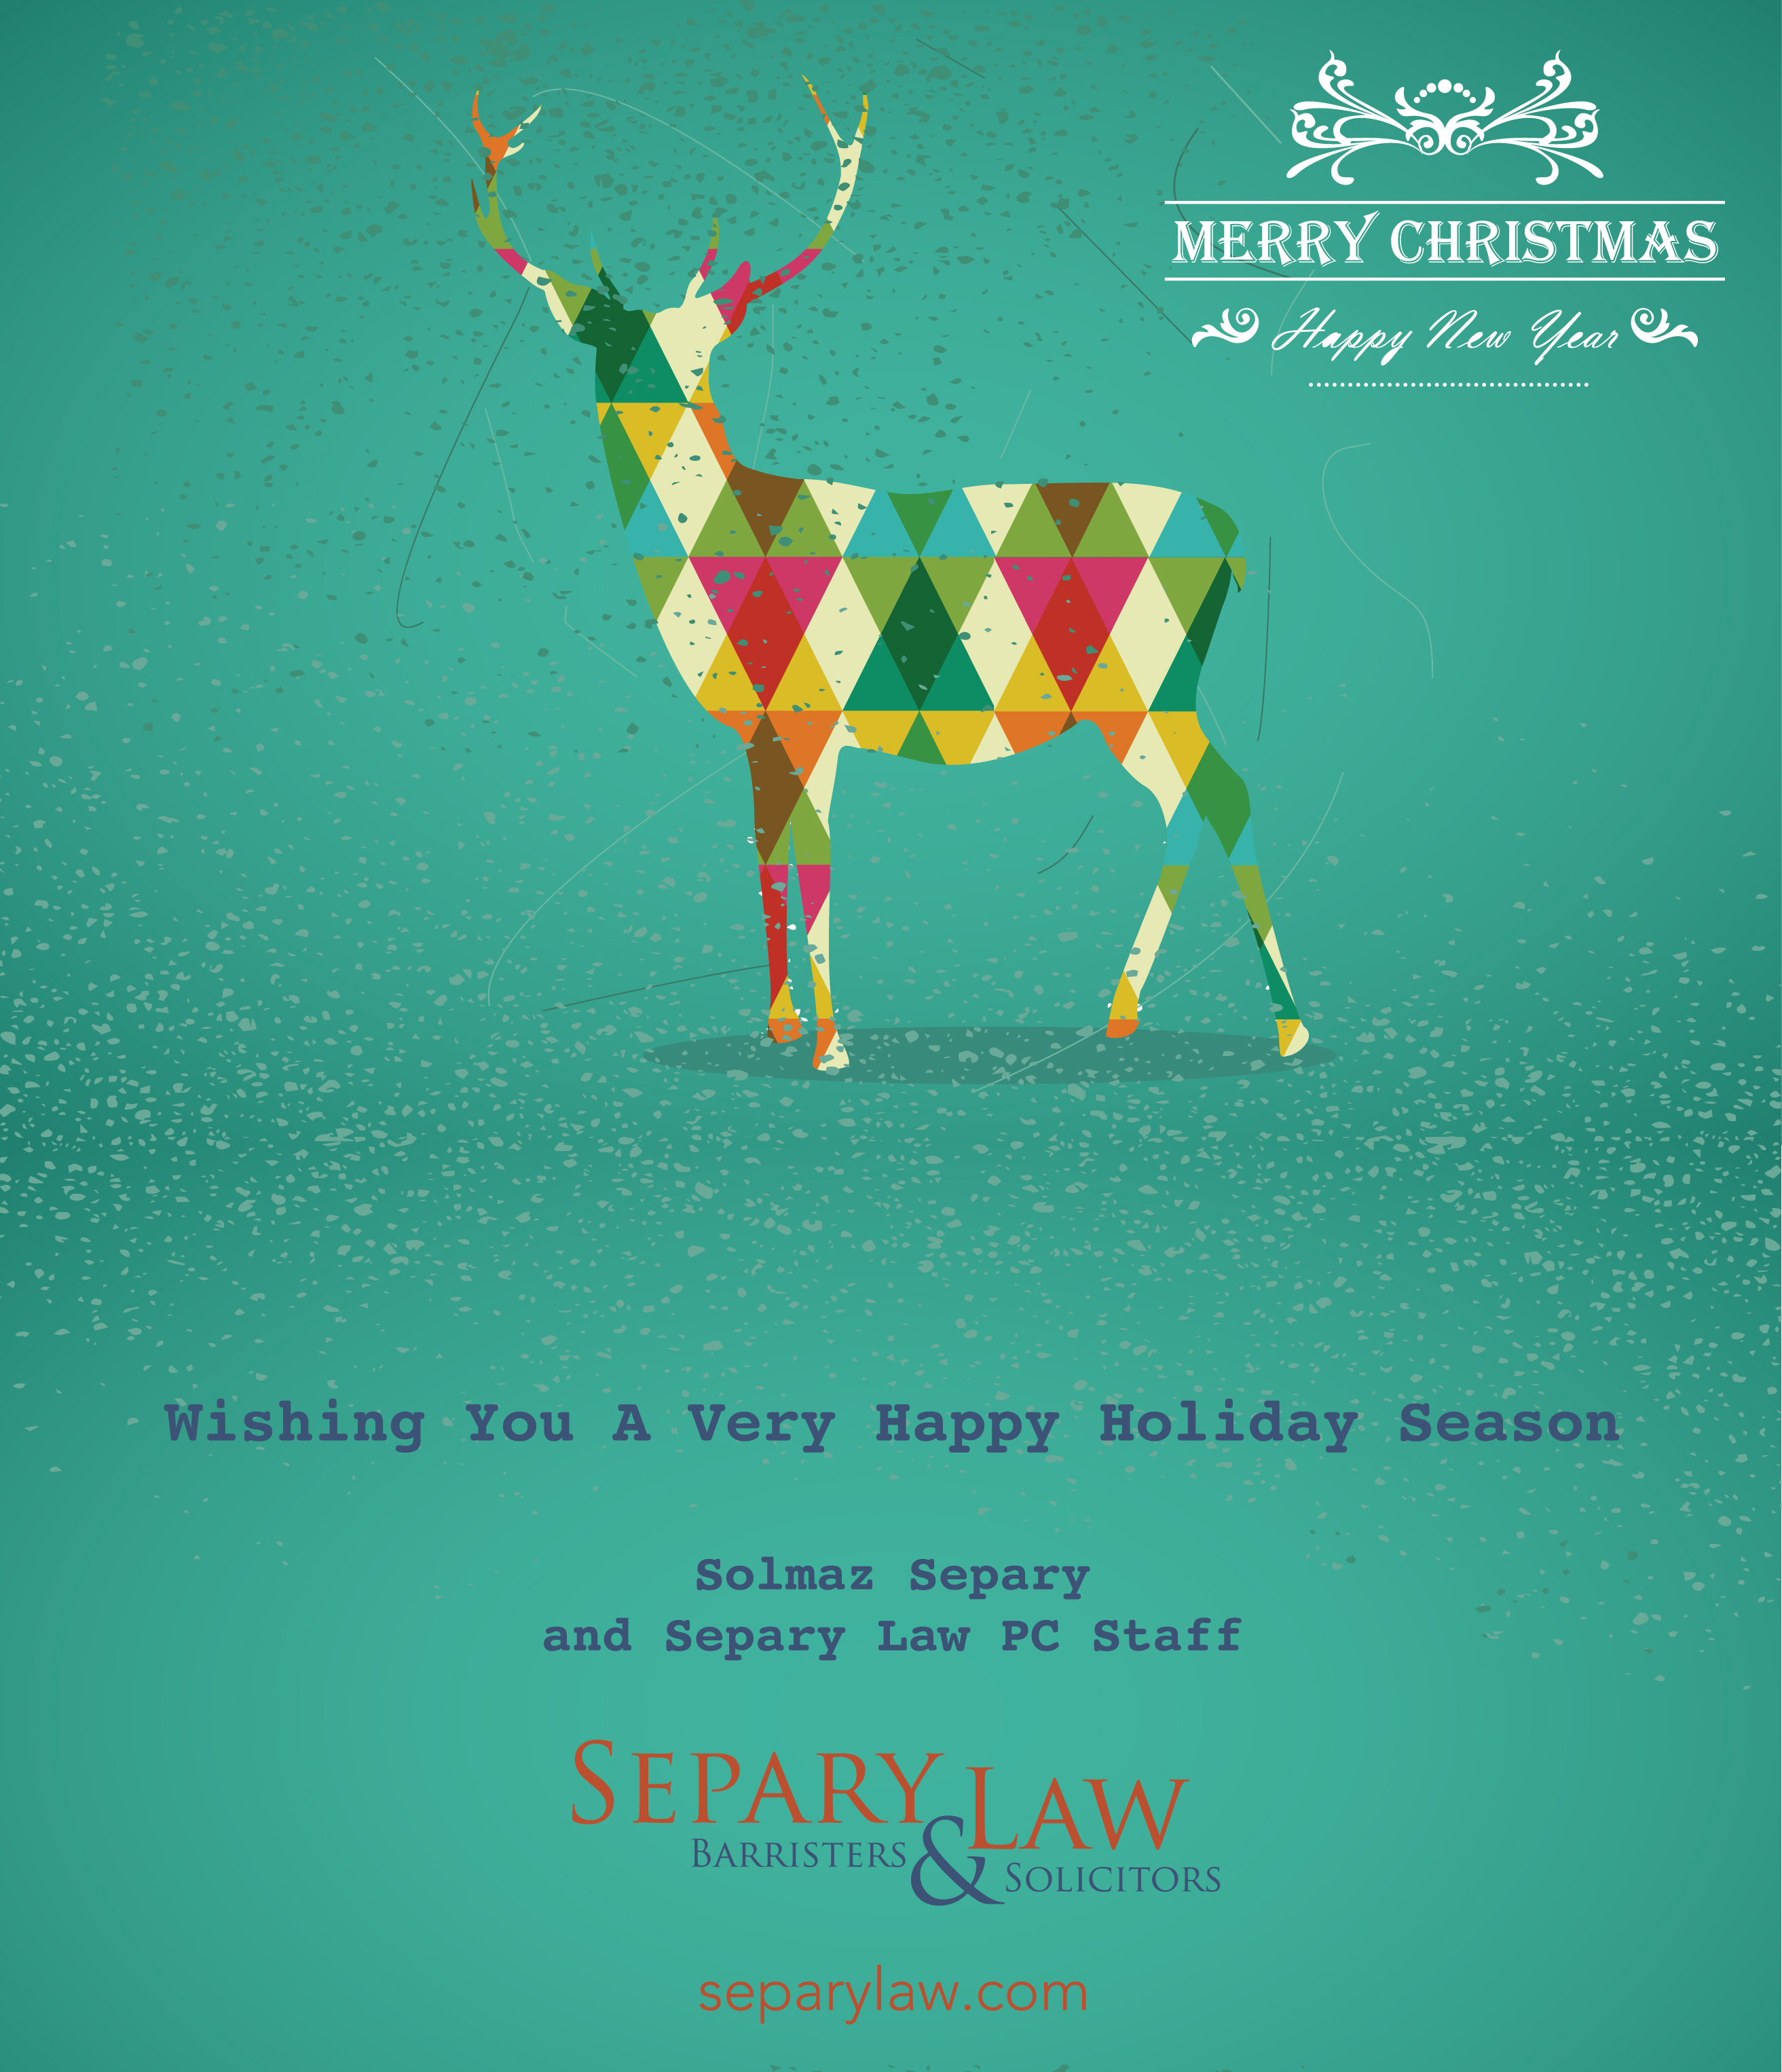 Separy Law Greeting Card 2017 Email 2